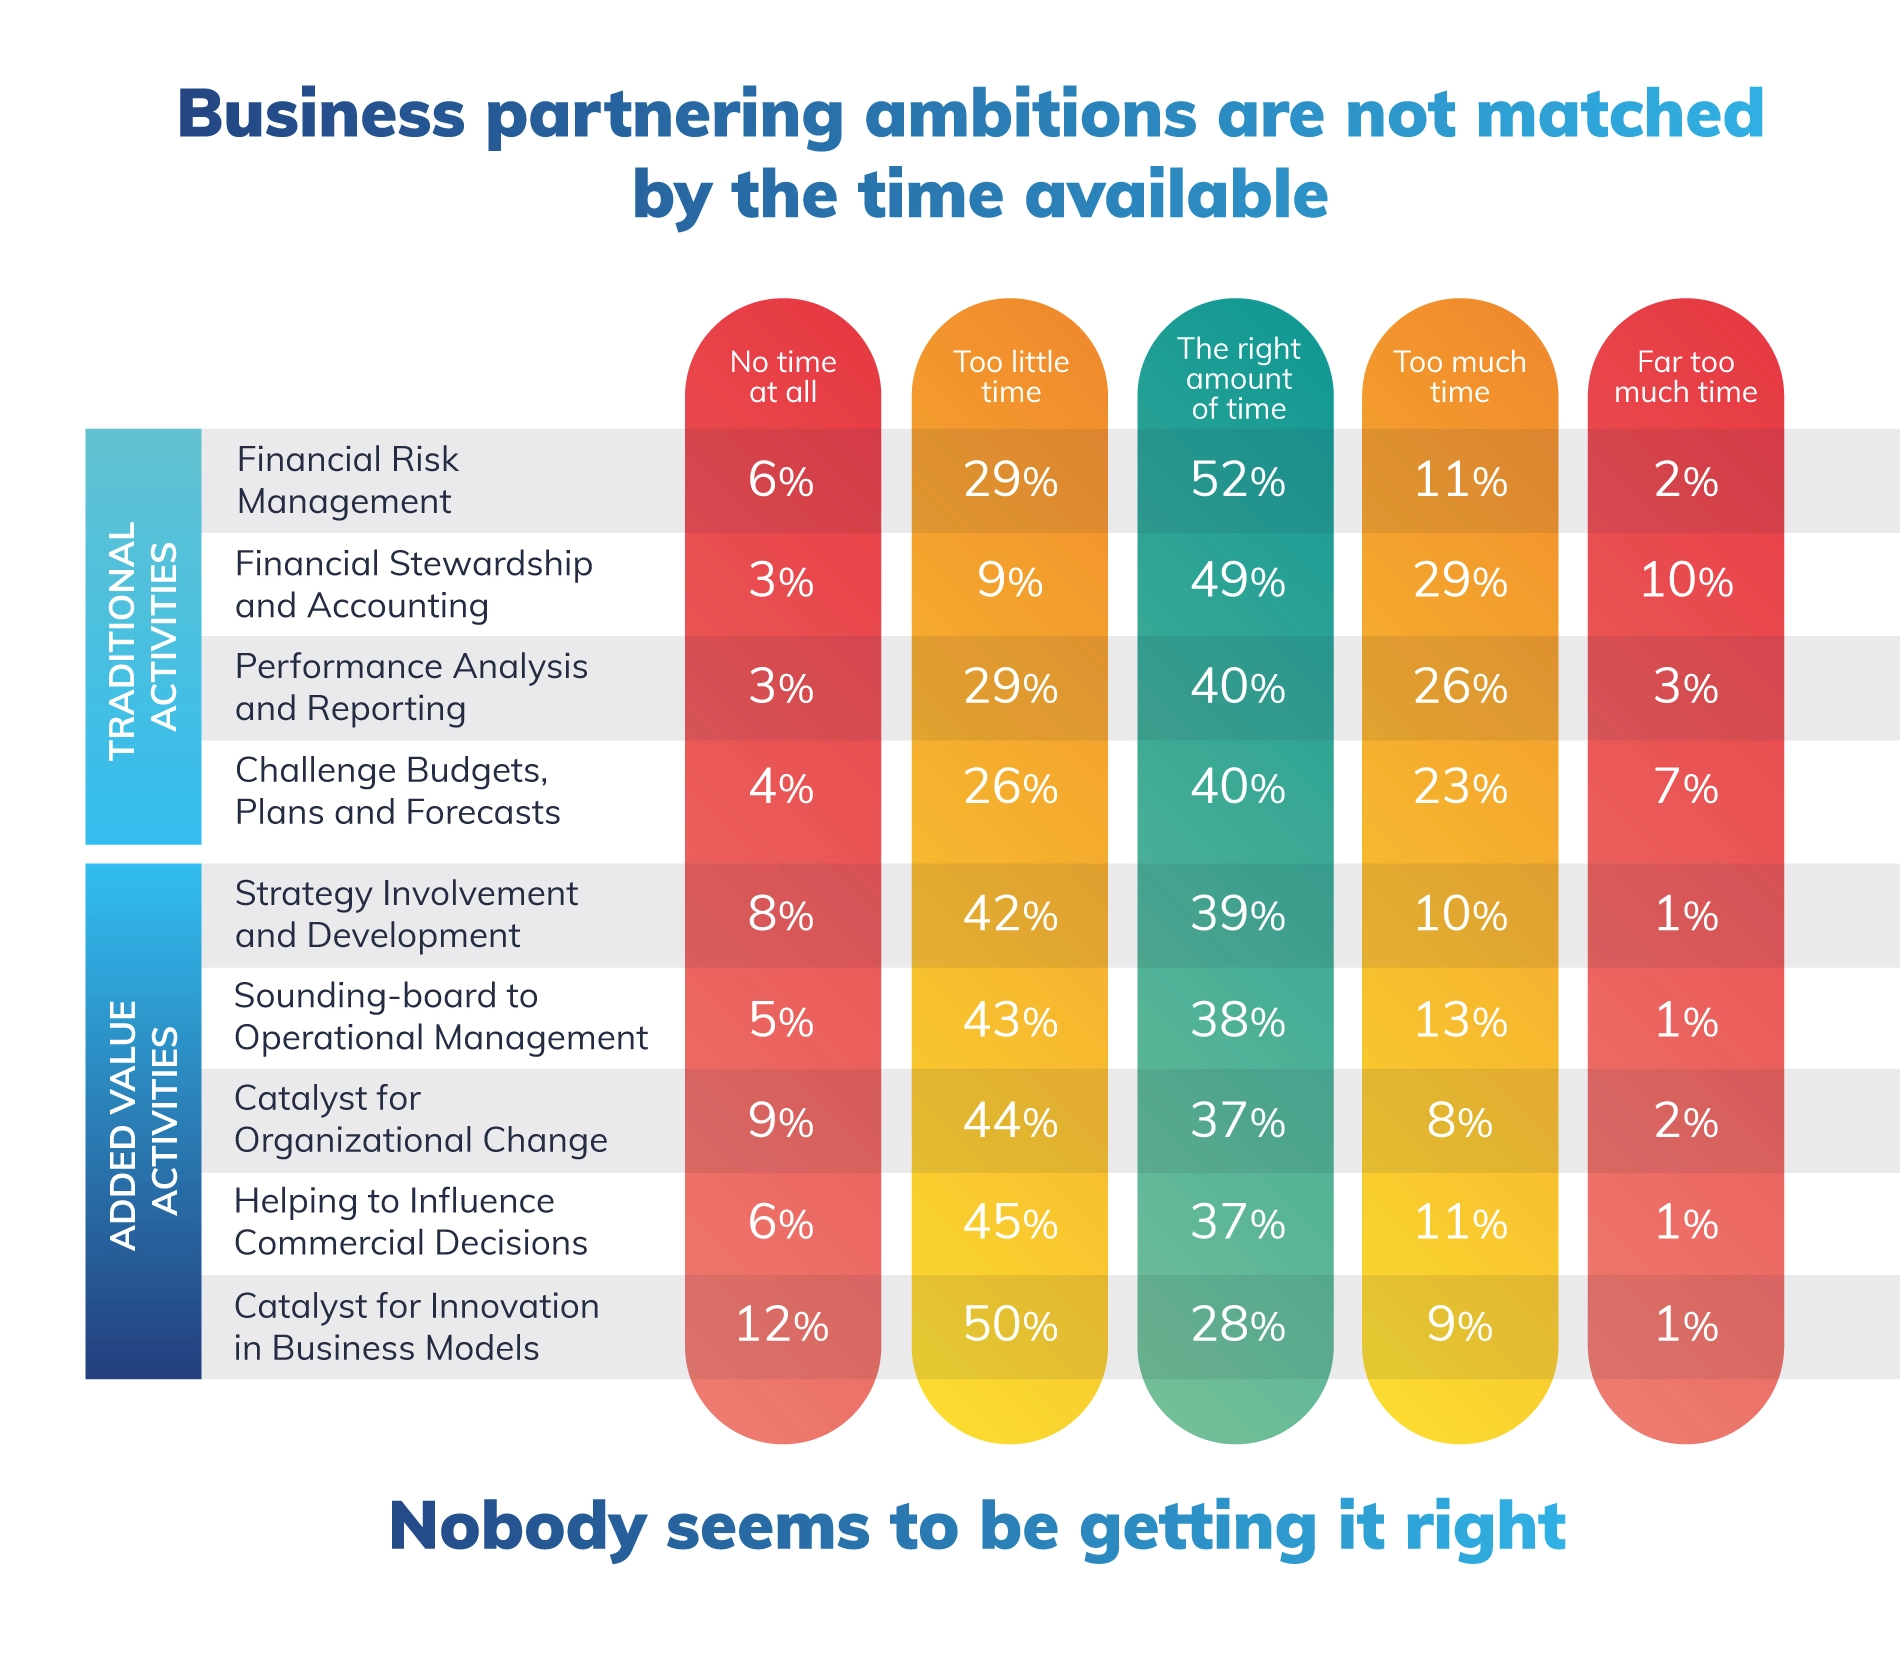 What Does the Future of Business Partnering Look Like? Image 2